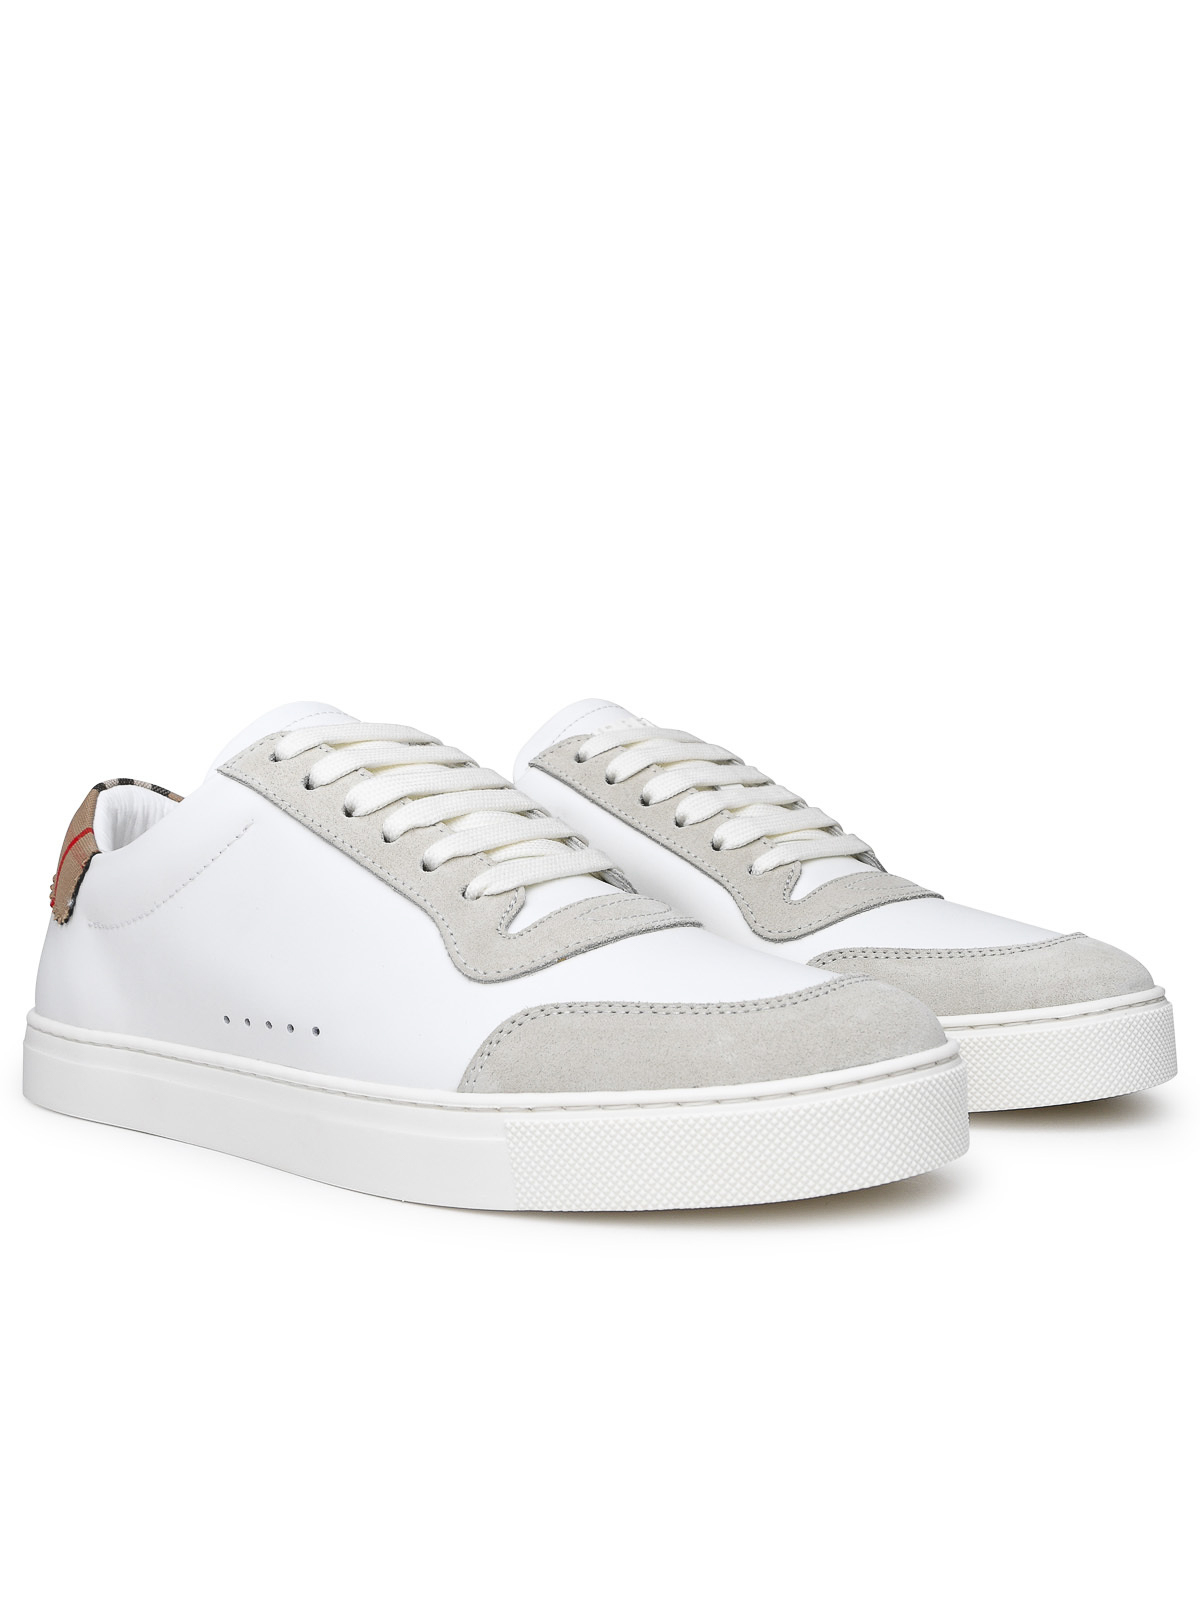 Trainers Burberry - Leather sneakers - 8066468 | Shop online at iKRIX